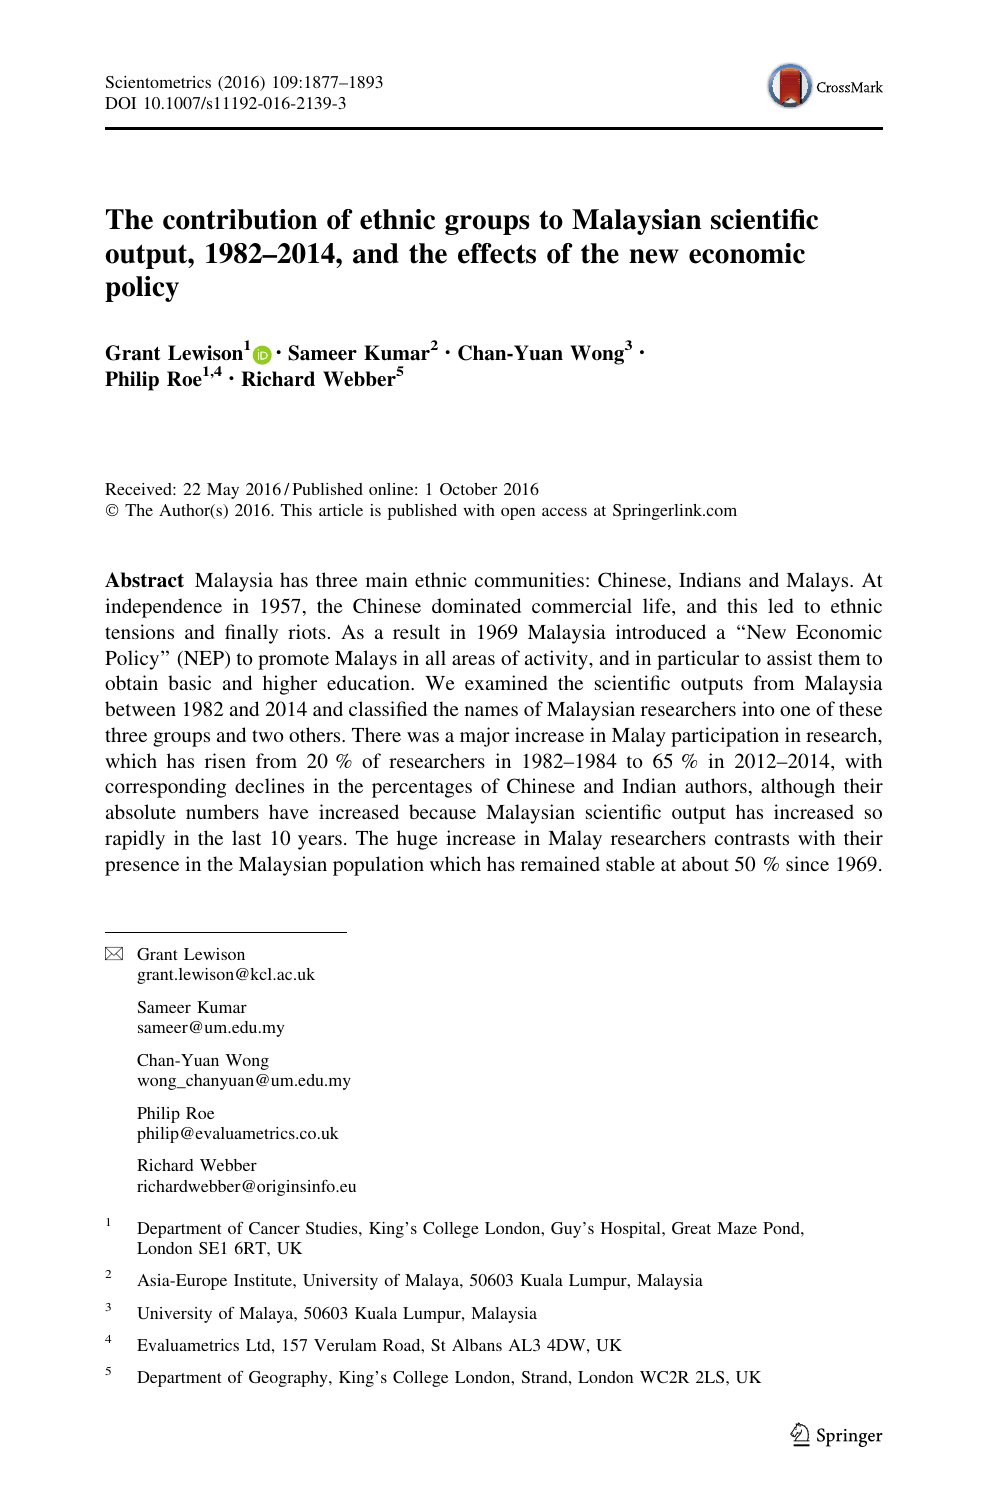 The Contribution Of Ethnic Groups To Malaysian Scientific Output 1982 2014 And The Effects Of The New Economic Policy Topic Of Research Paper In Economics And Business Download Scholarly Article Pdf And